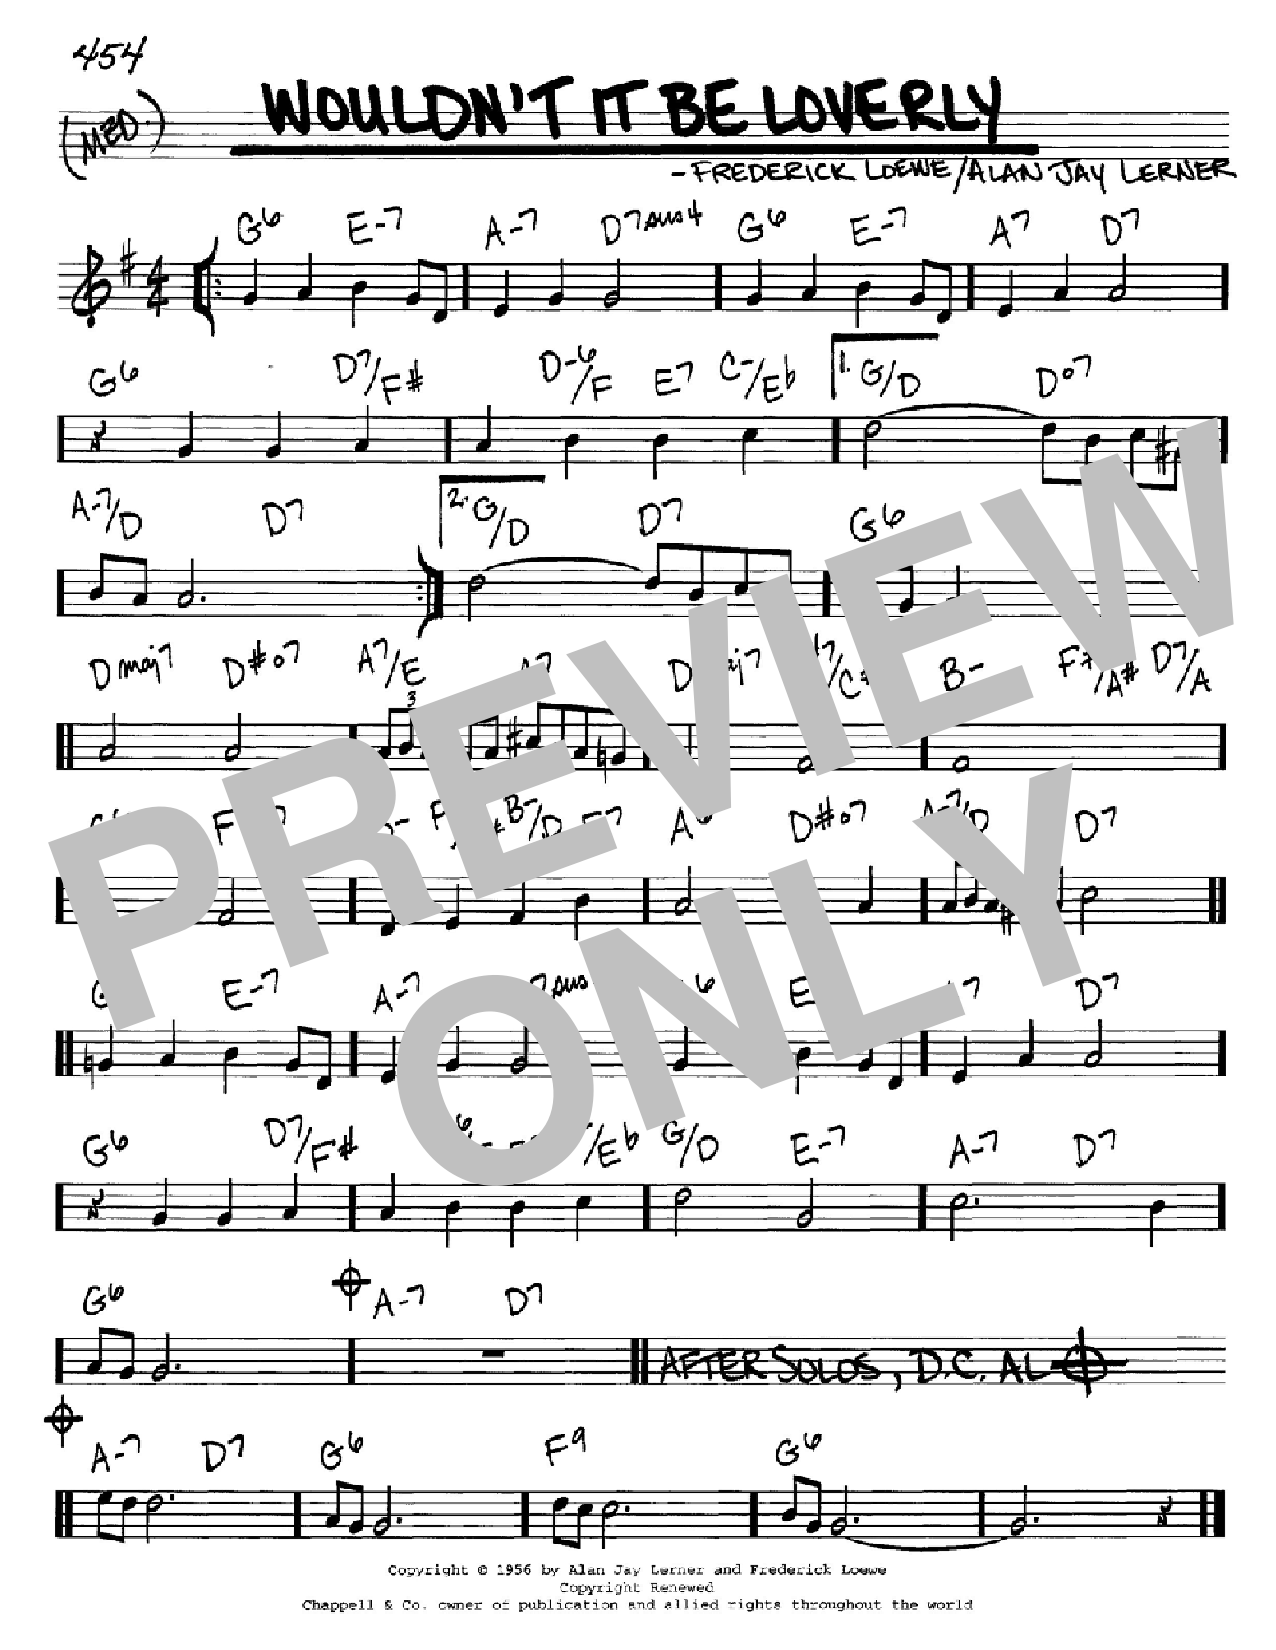 Download Lerner & Loewe Wouldn't It Be Loverly Sheet Music